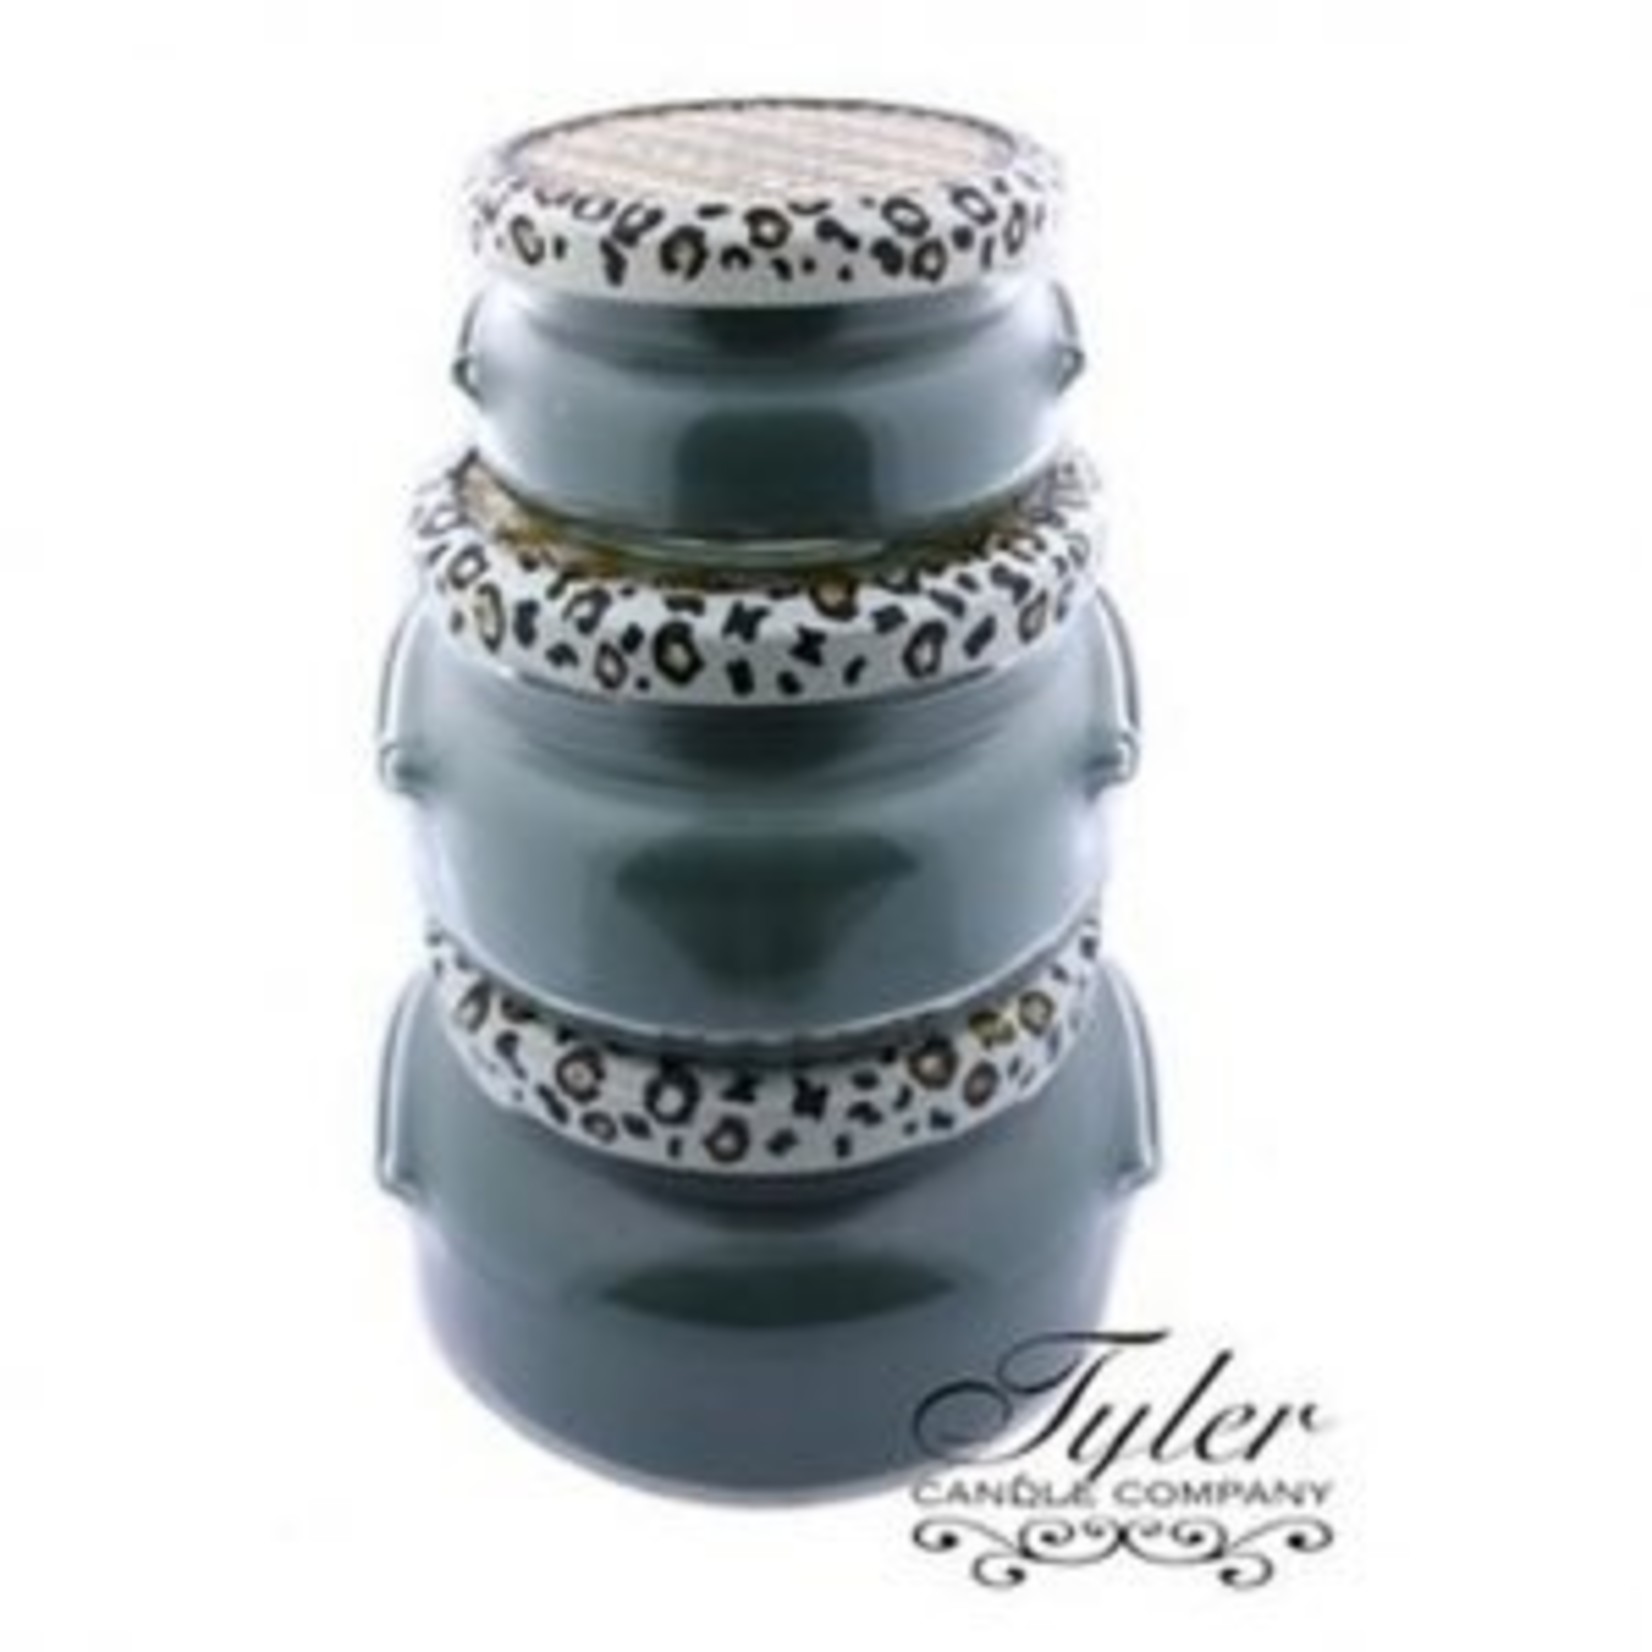 Tyler Candle Company Resort Candle